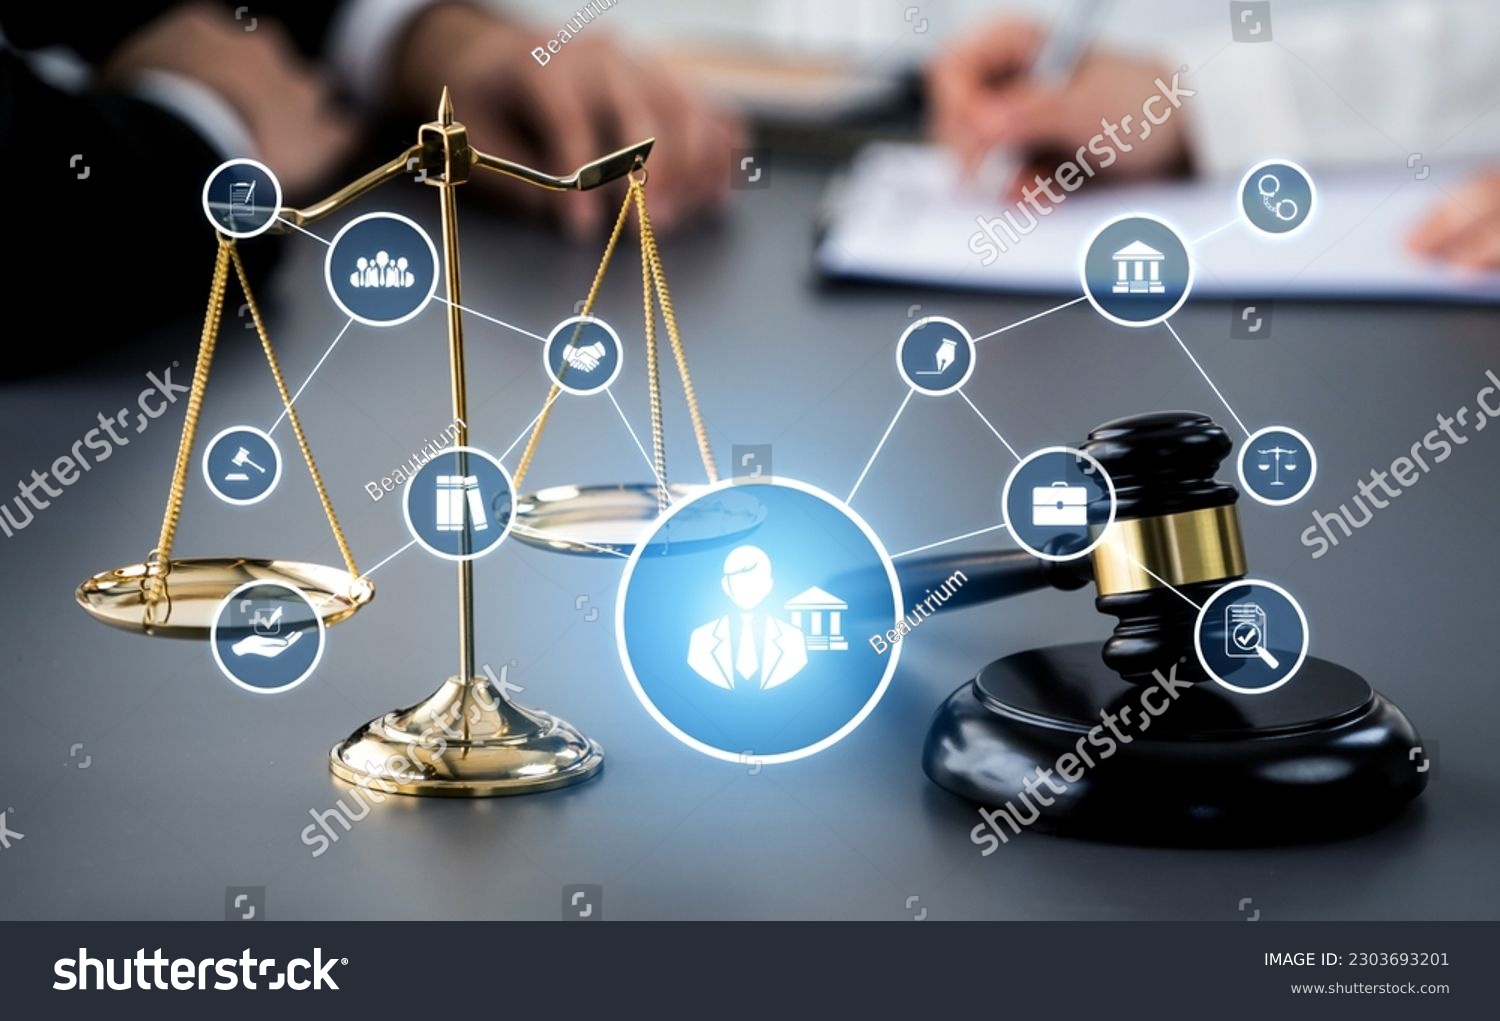 Smart law, legal advice icons and lawyer working tools in the lawyers office showing concept of digital law and online technology of astute law and regulations . #2303693201